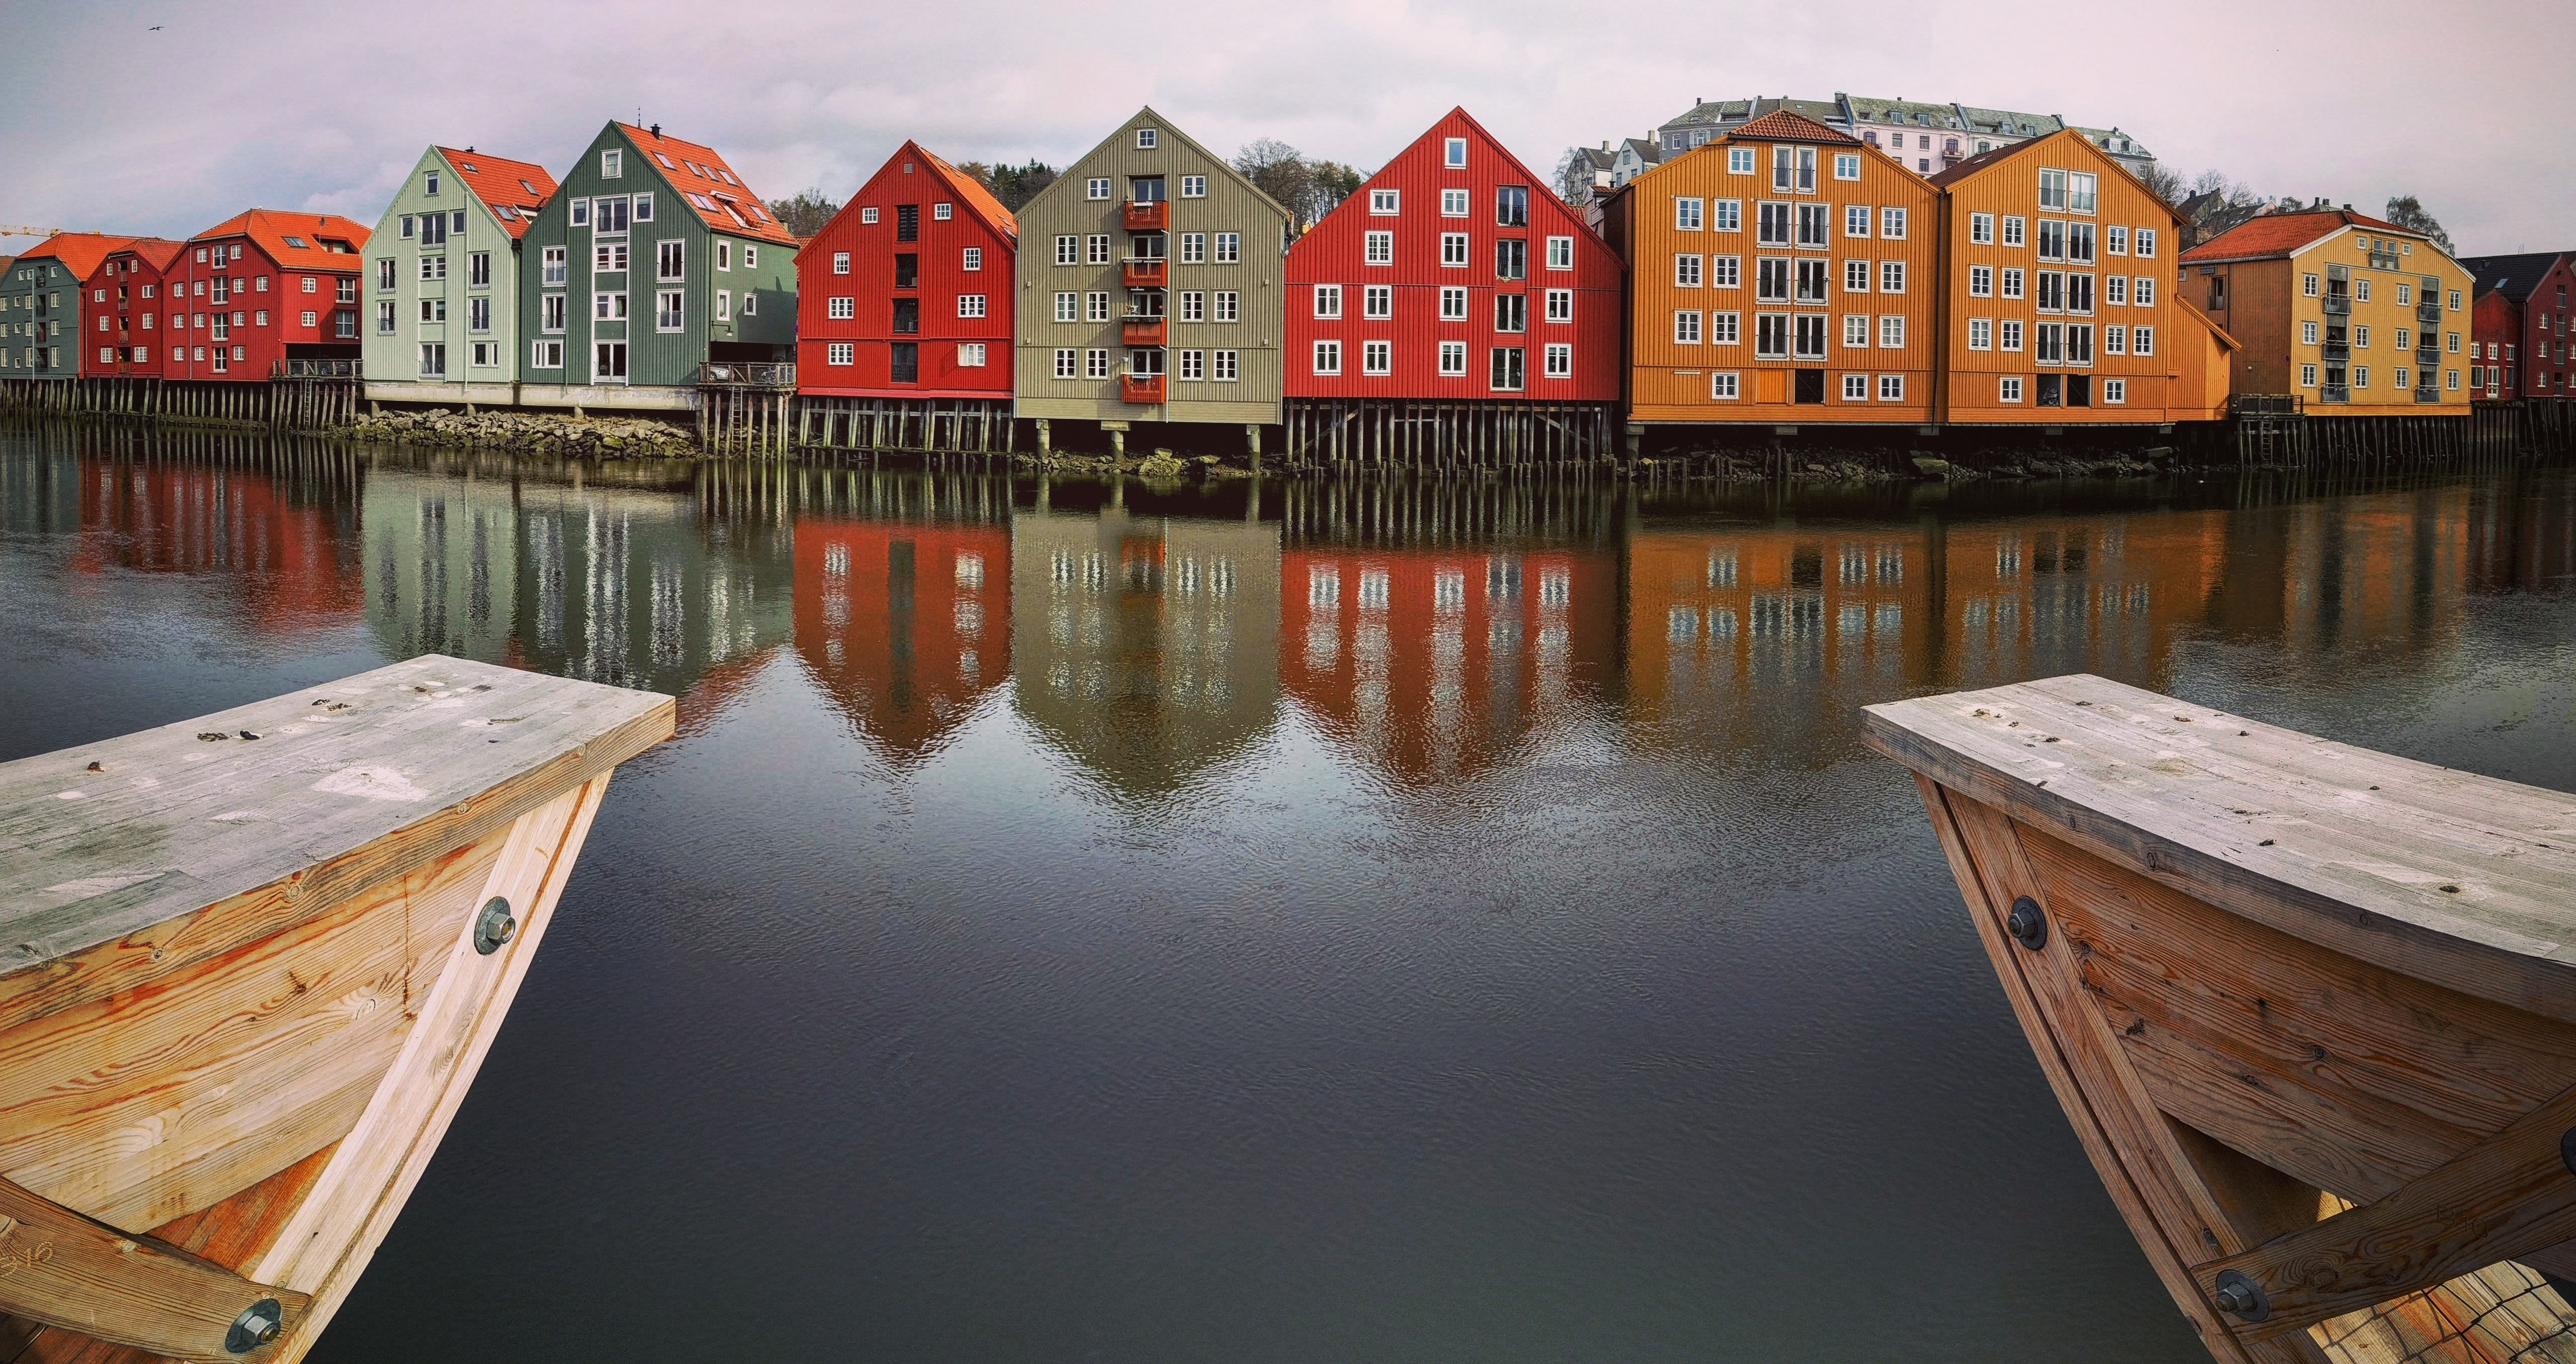 multicolored houses near lake under cloudy sky